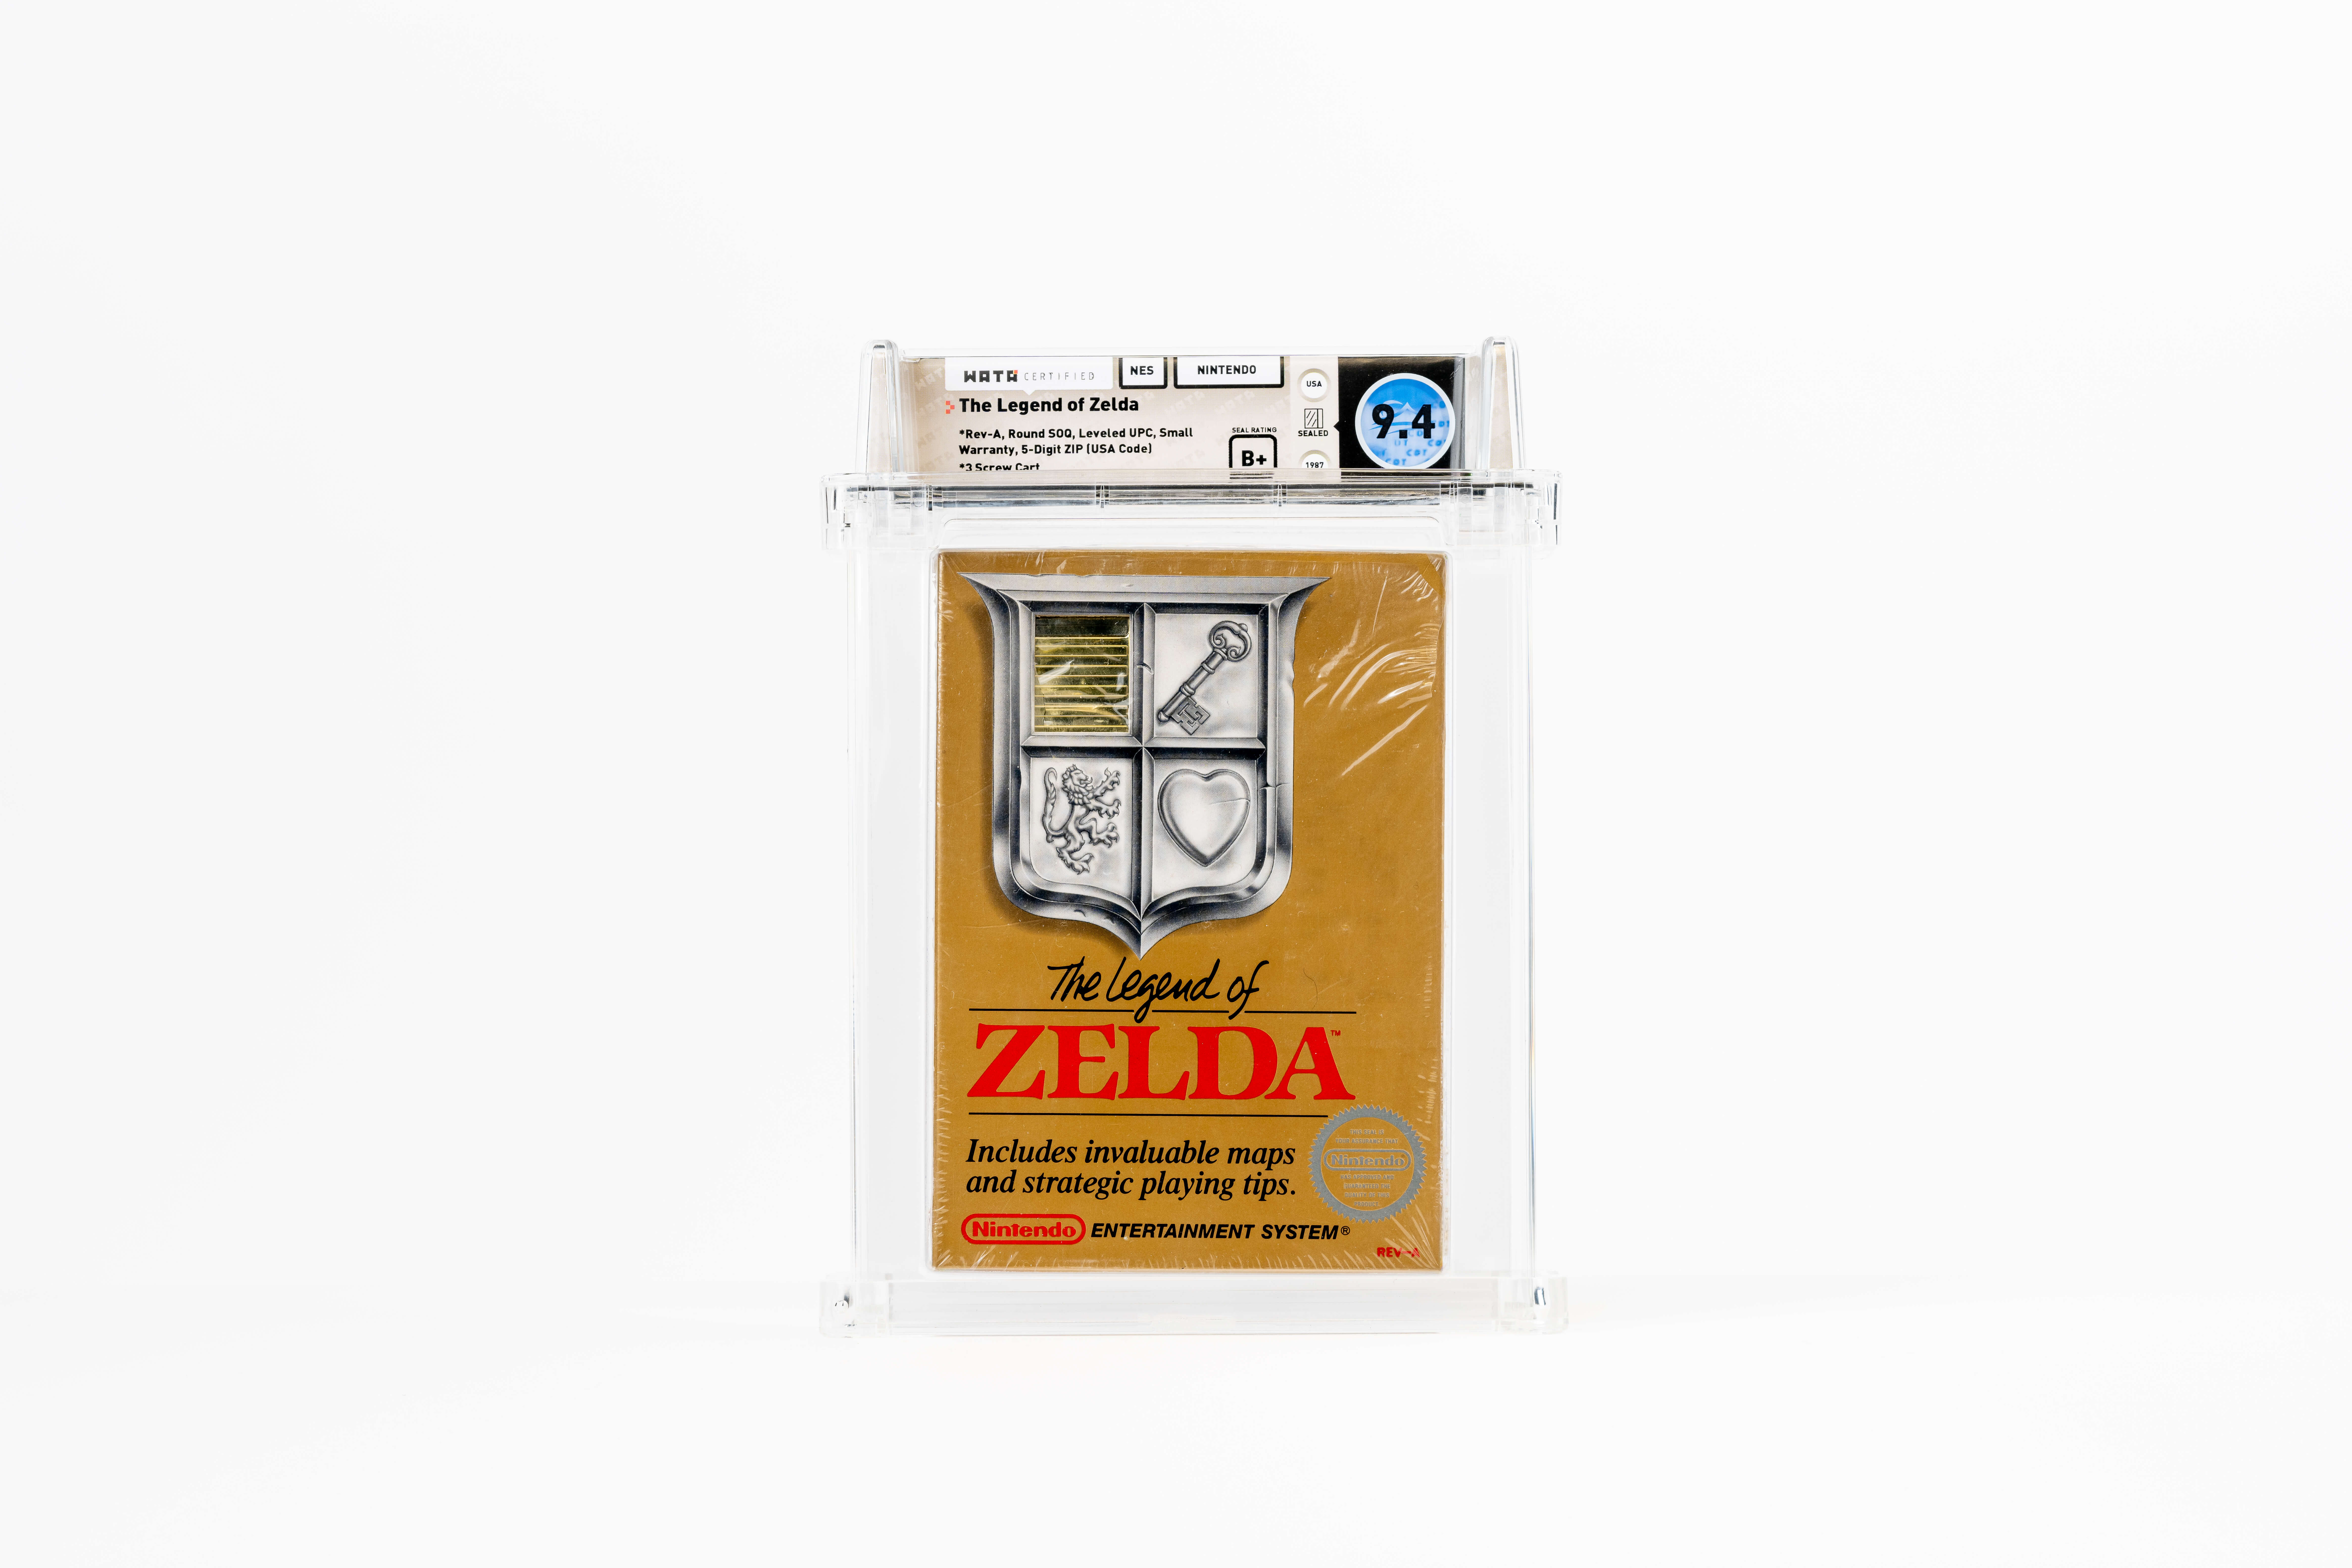 Rally's copy of The Legend of Zelda on Nintendo Entertainment System